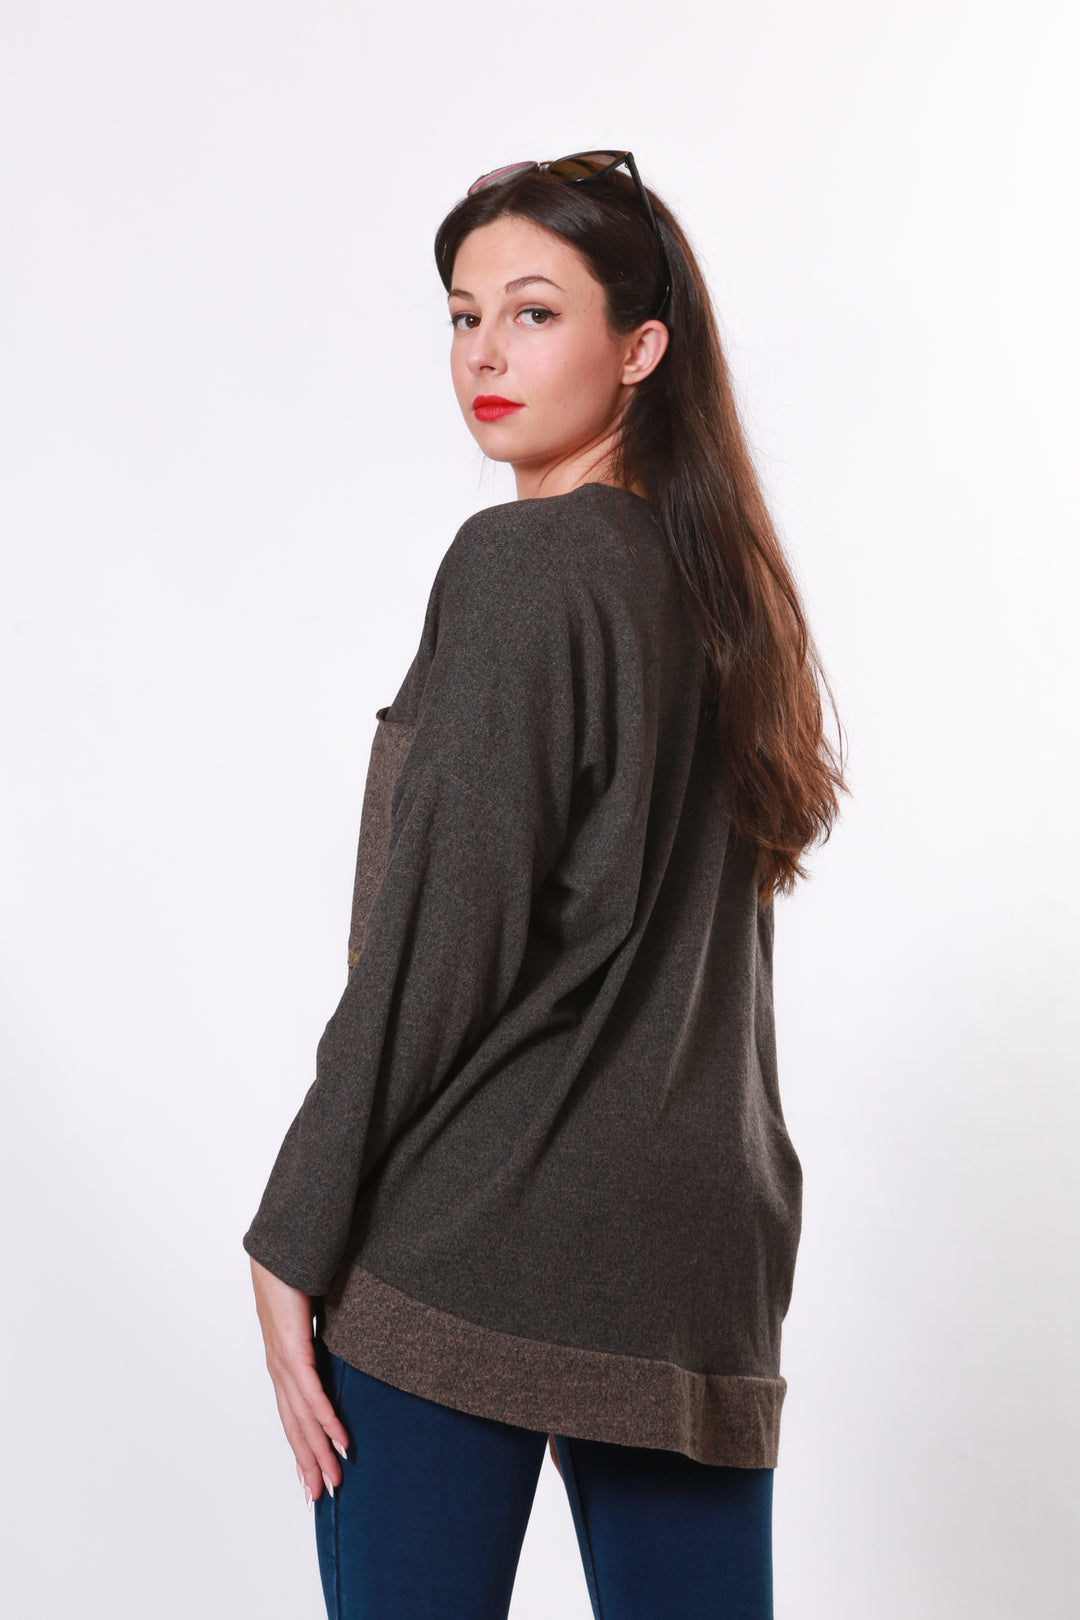 Made in Italy V neck knit with gold embellishment - Brownaos-init aos-animate